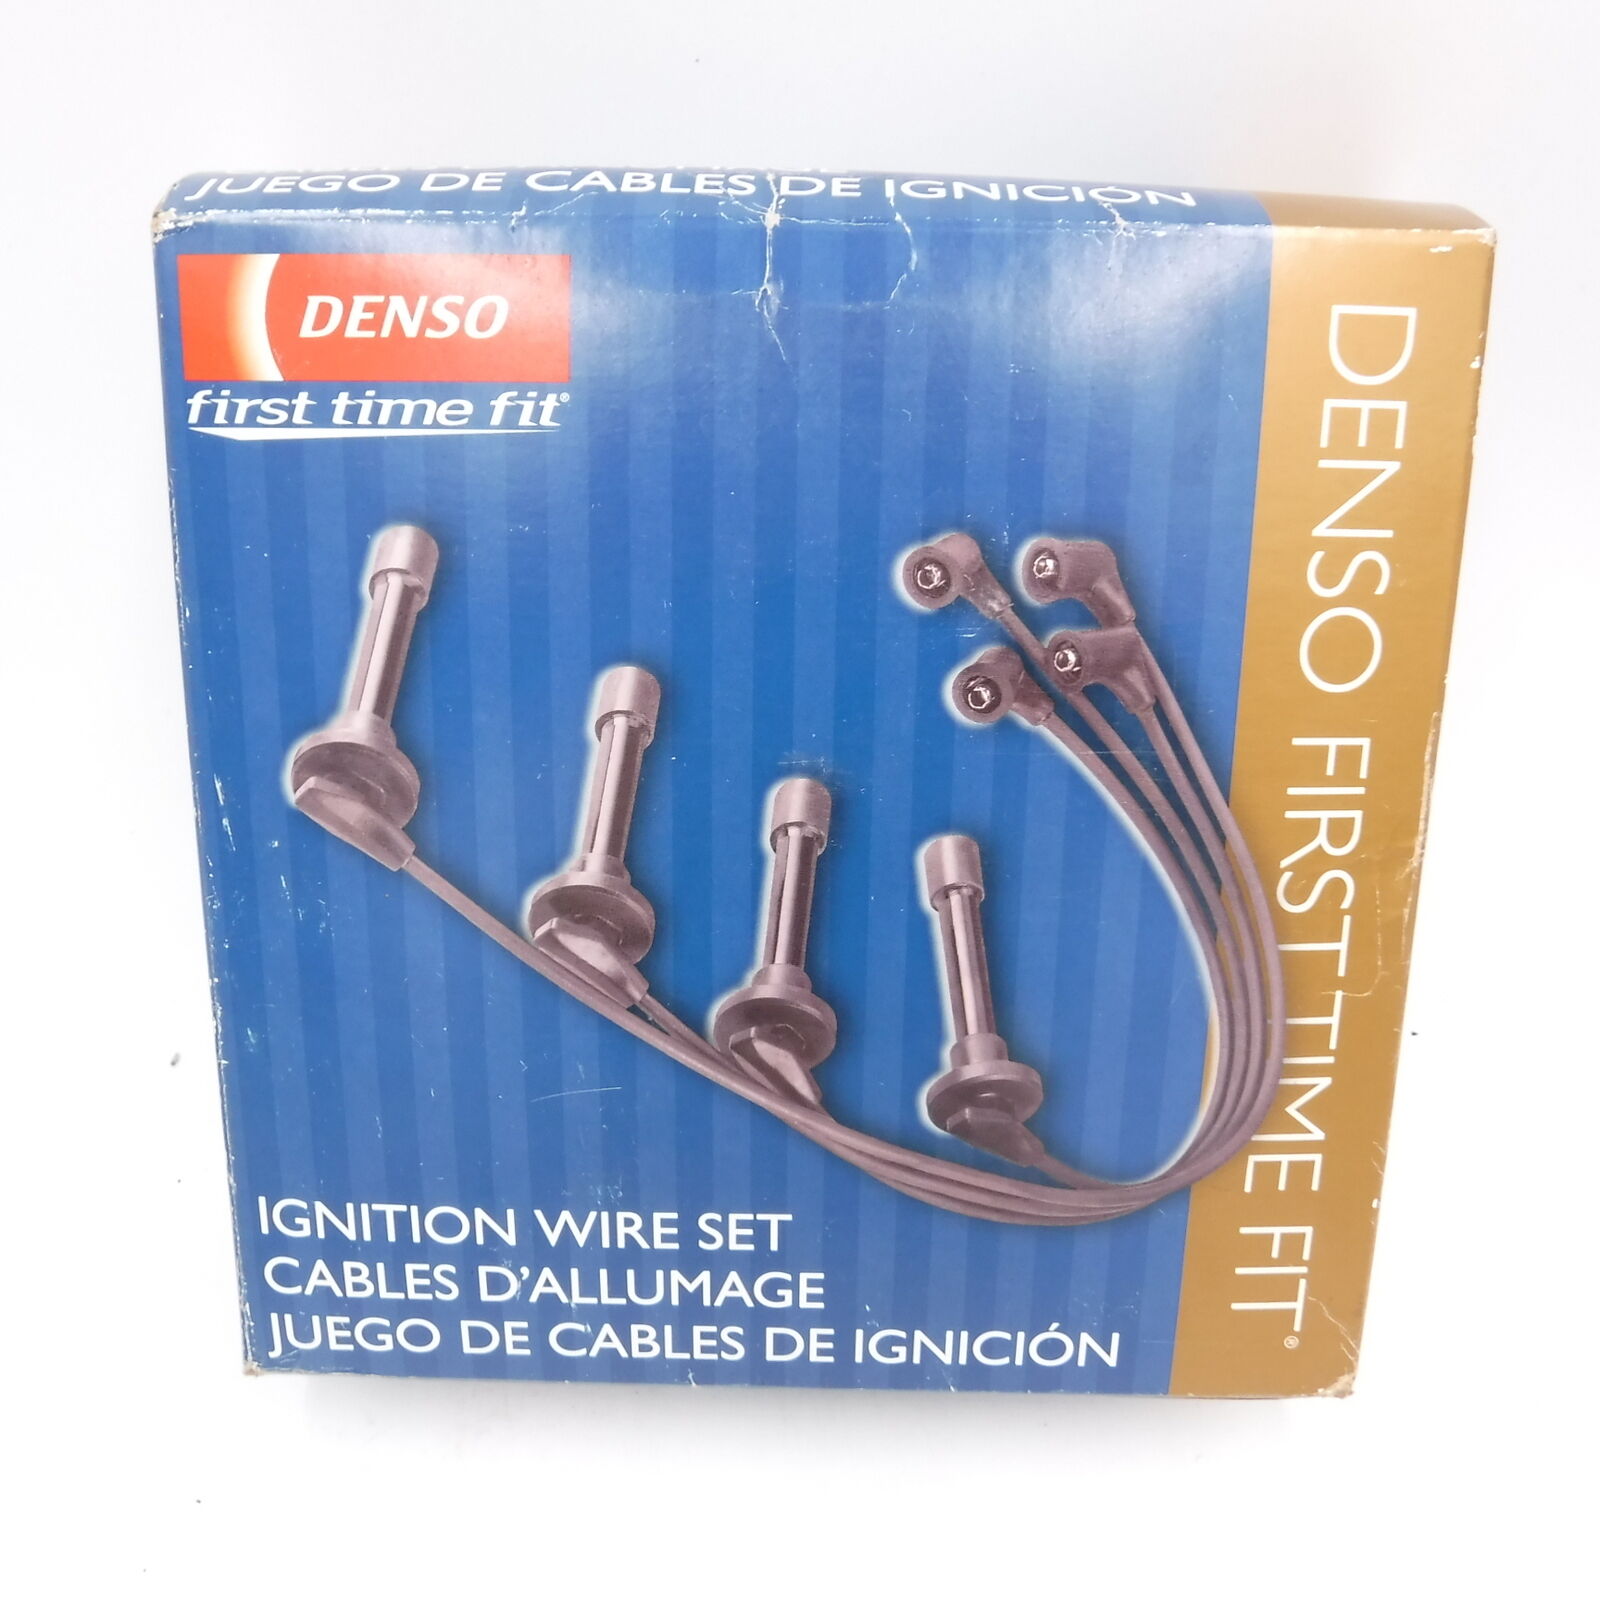 Denso 671-5003 Ignition Wire Set 27911 for 1993-1997 Volvo 850